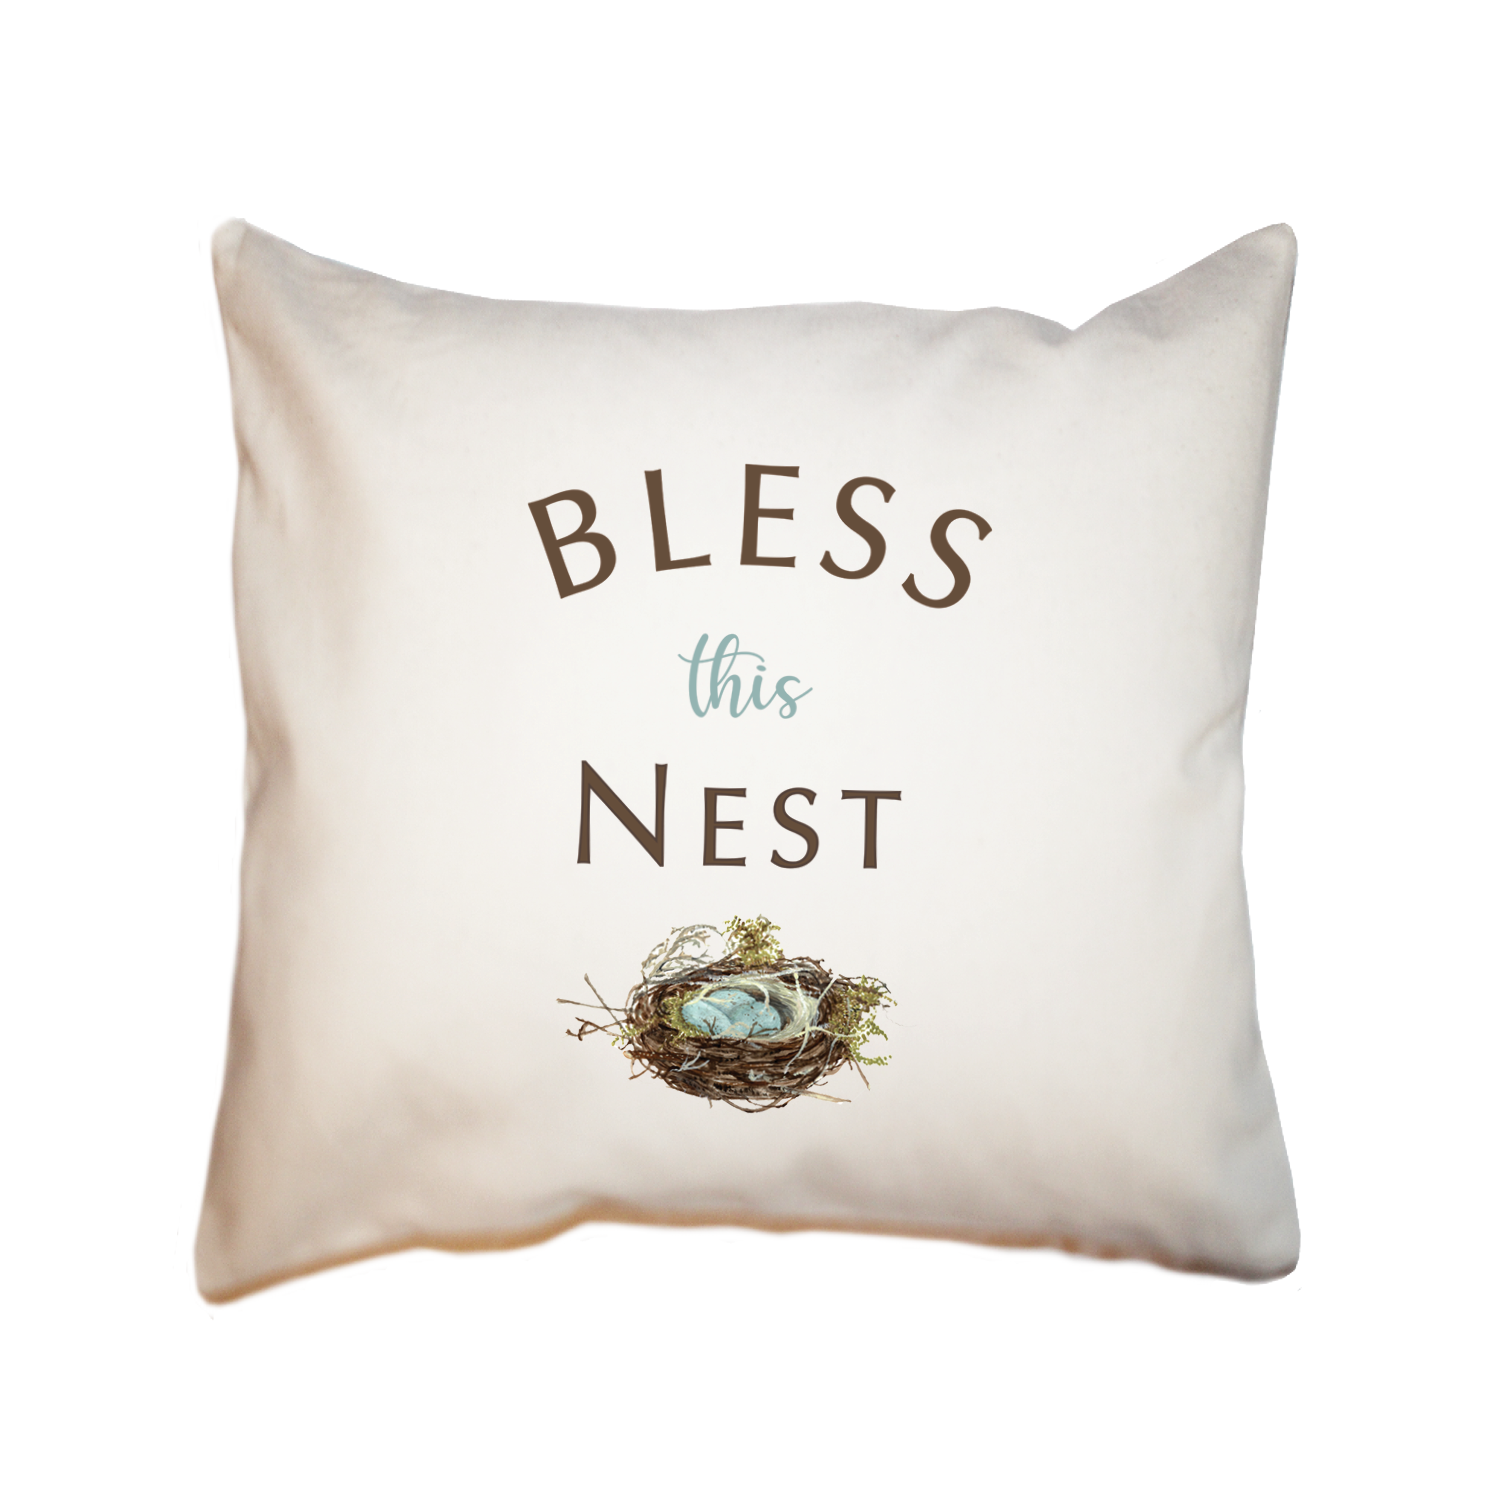 bless this nest square pillow